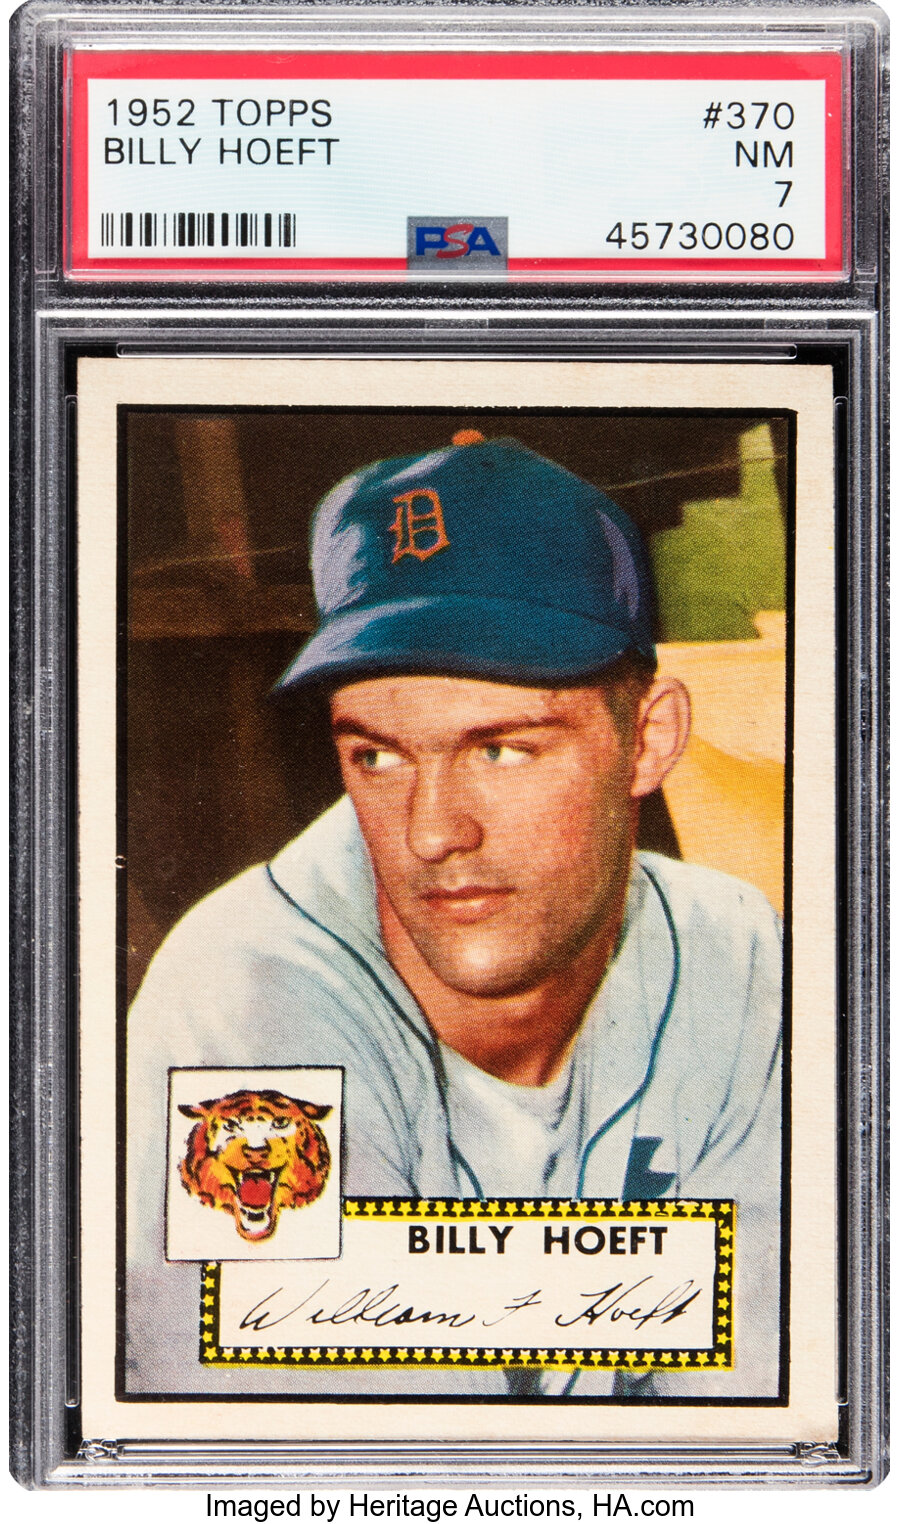 1952 Topps Billy Hoeft Rookie #370 PSA NM 7